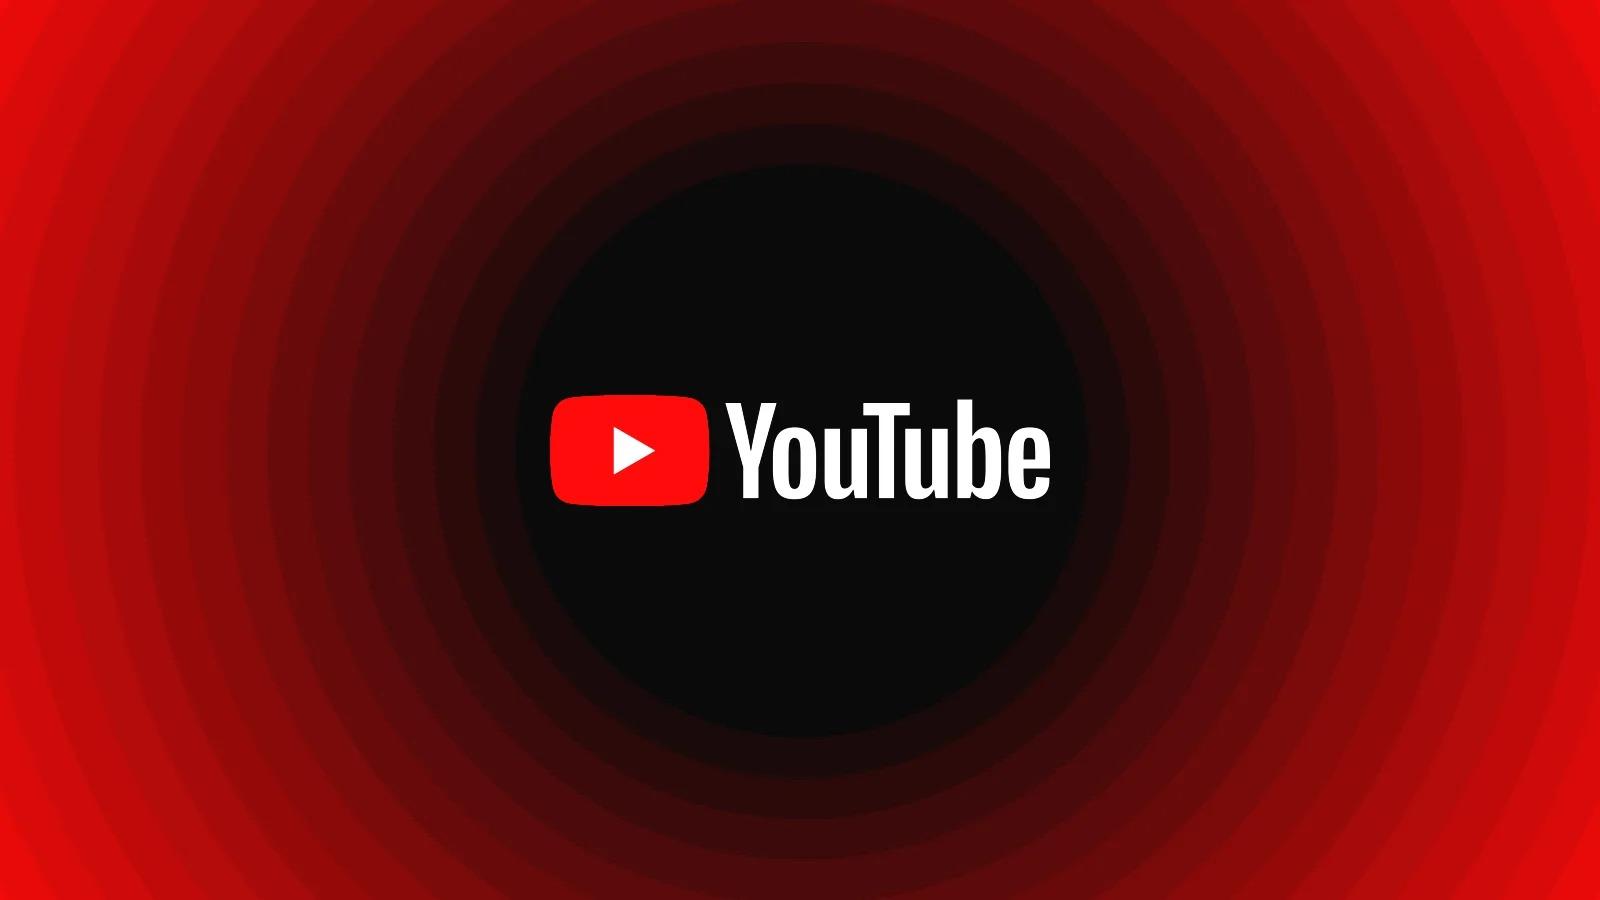 YouTube logo in a red background